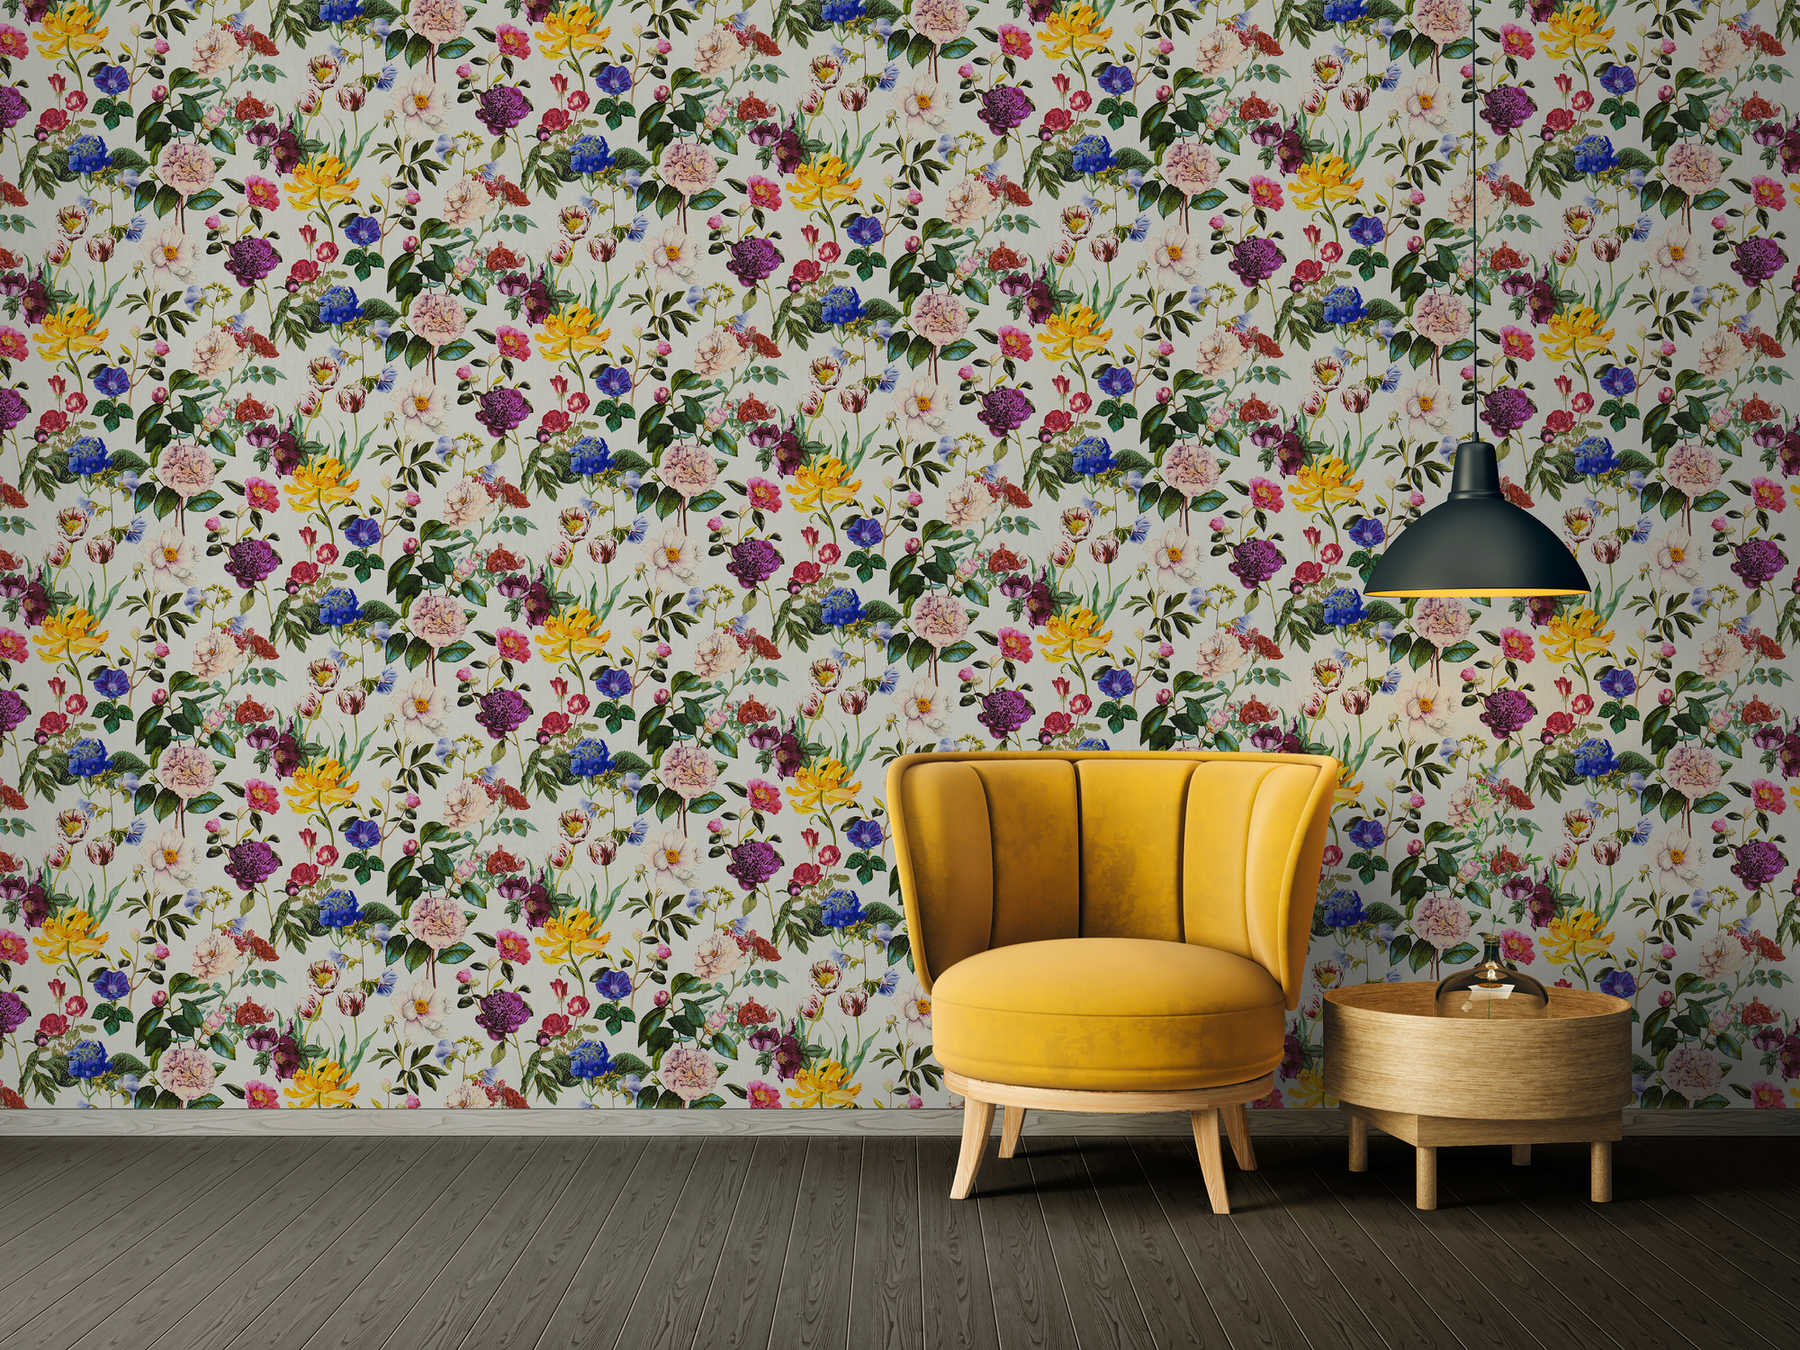             Floral wallpaper with flowers in bright colours - colourful, green, grey
        